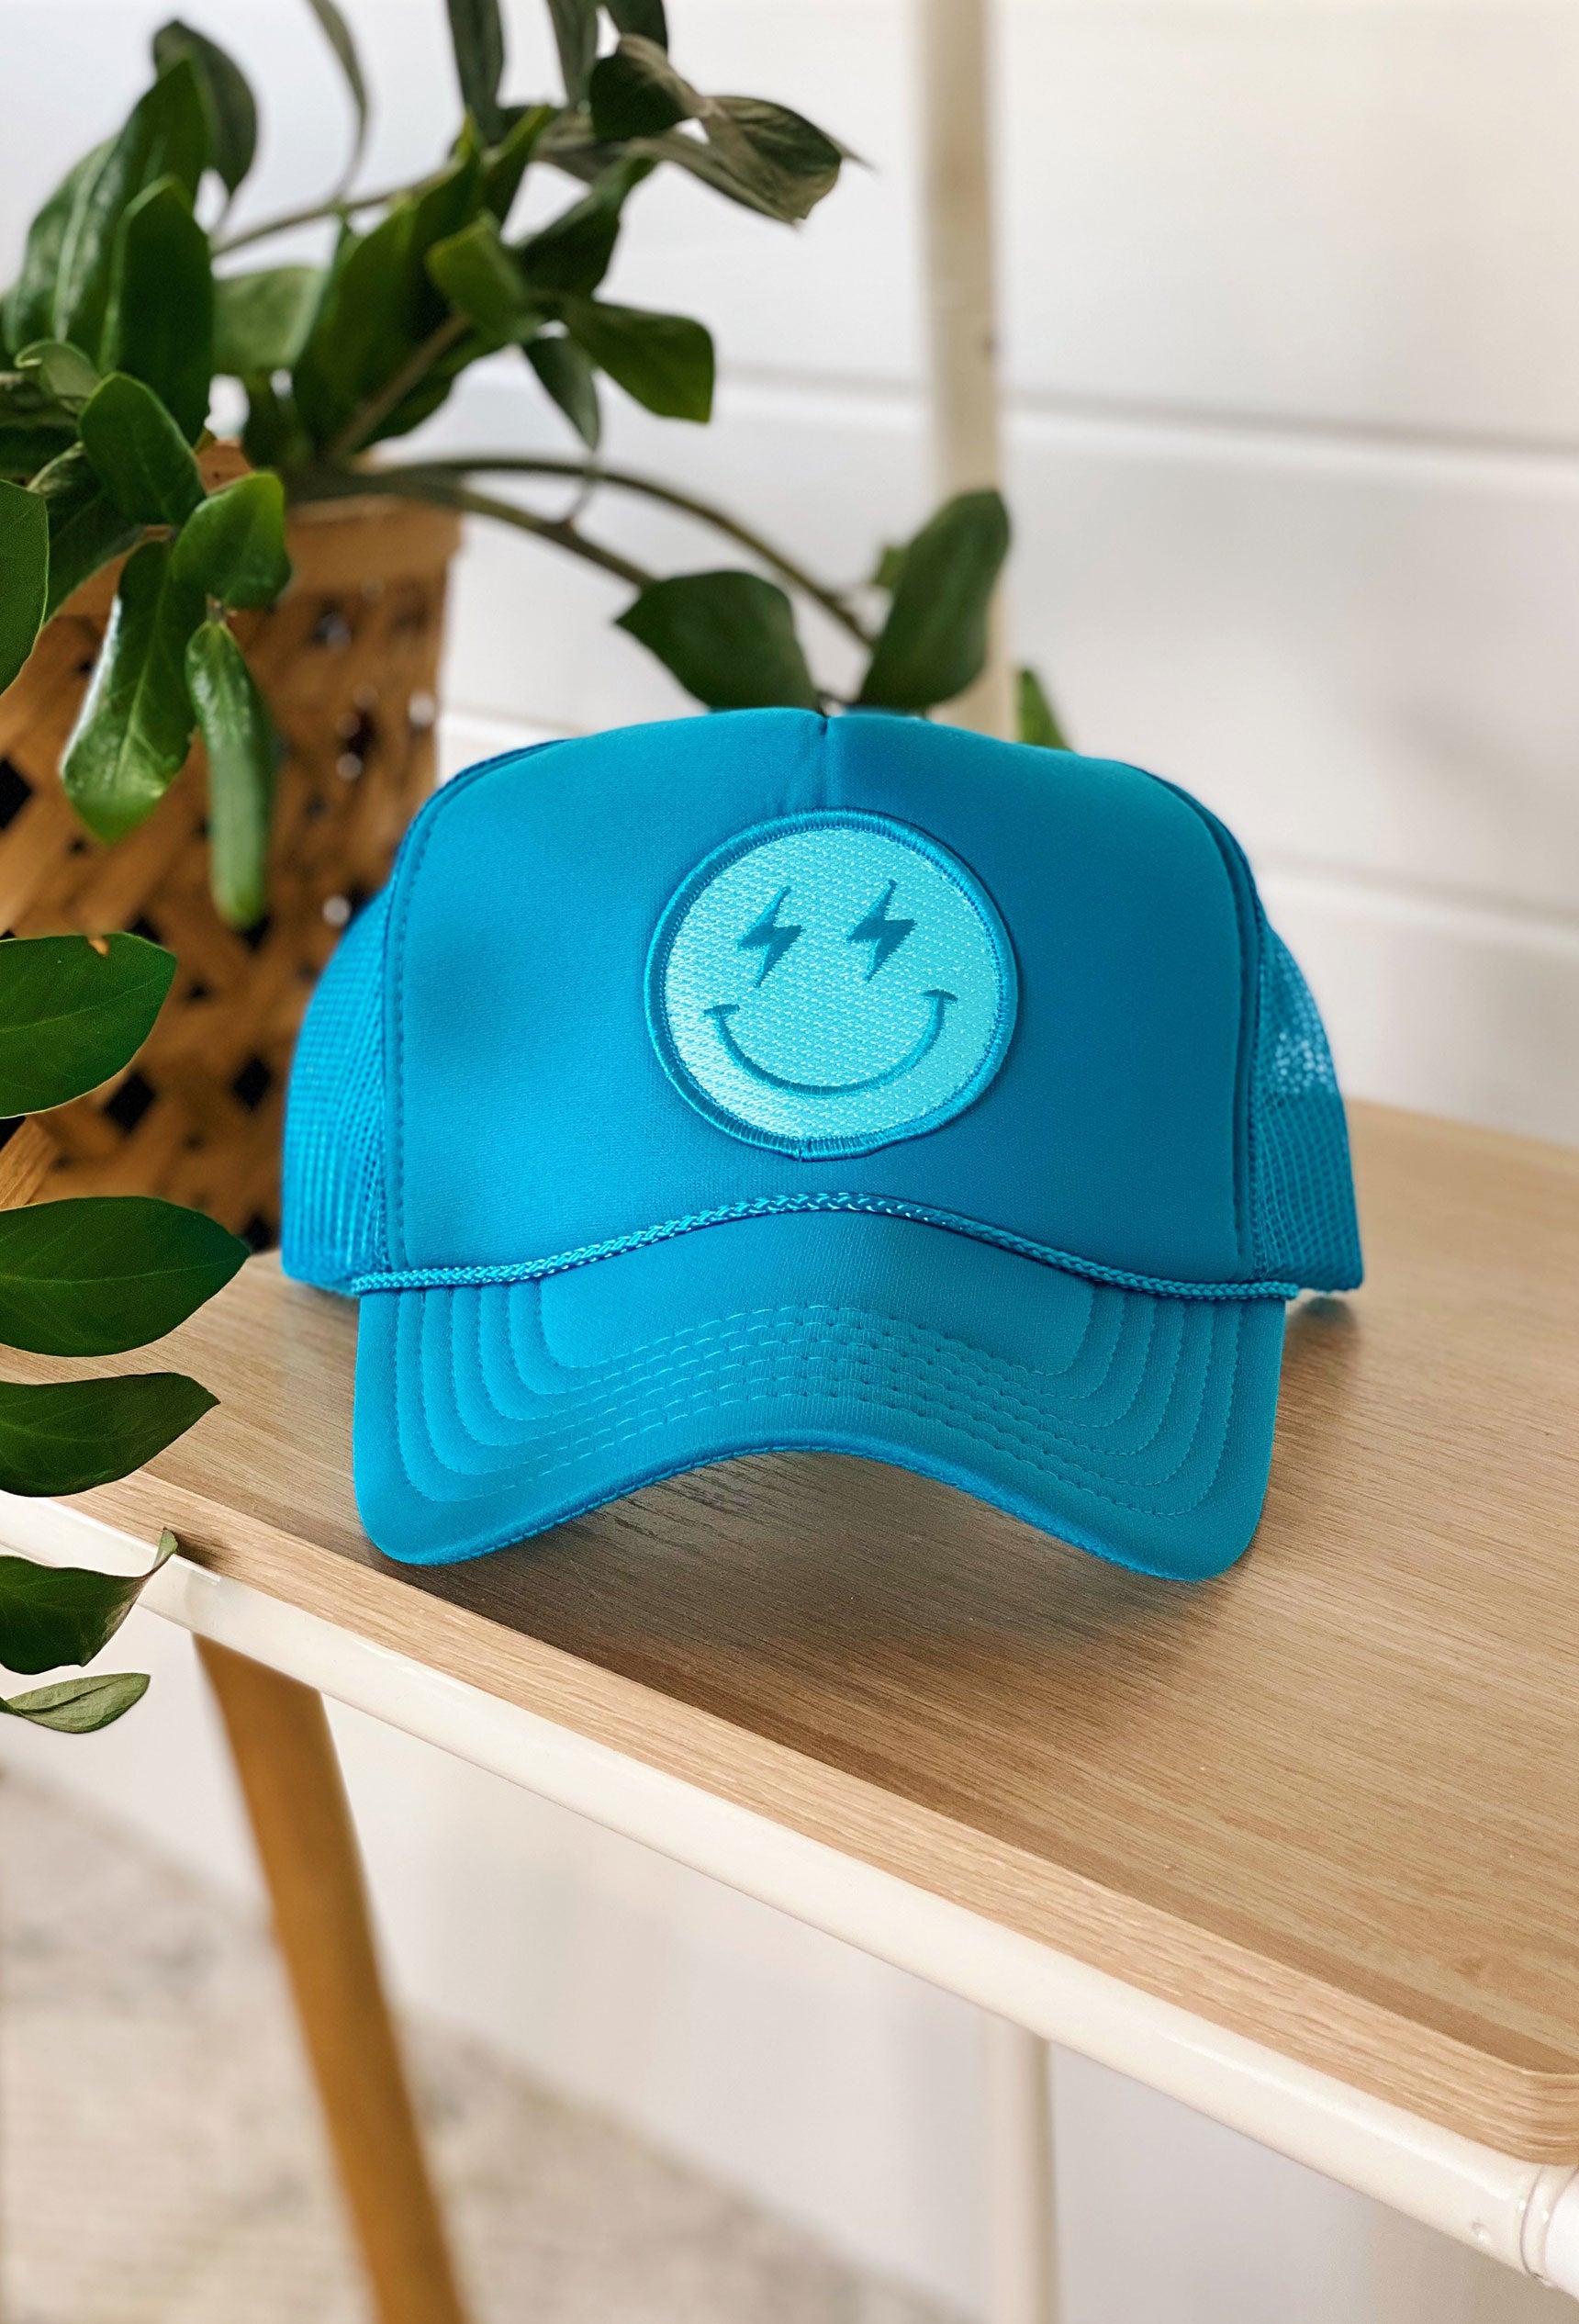 Happy Vibes Trucker Hat, turquoise blue, mesh backing, adjustable strap, blue smiley face patch with lightening bolts as eyes